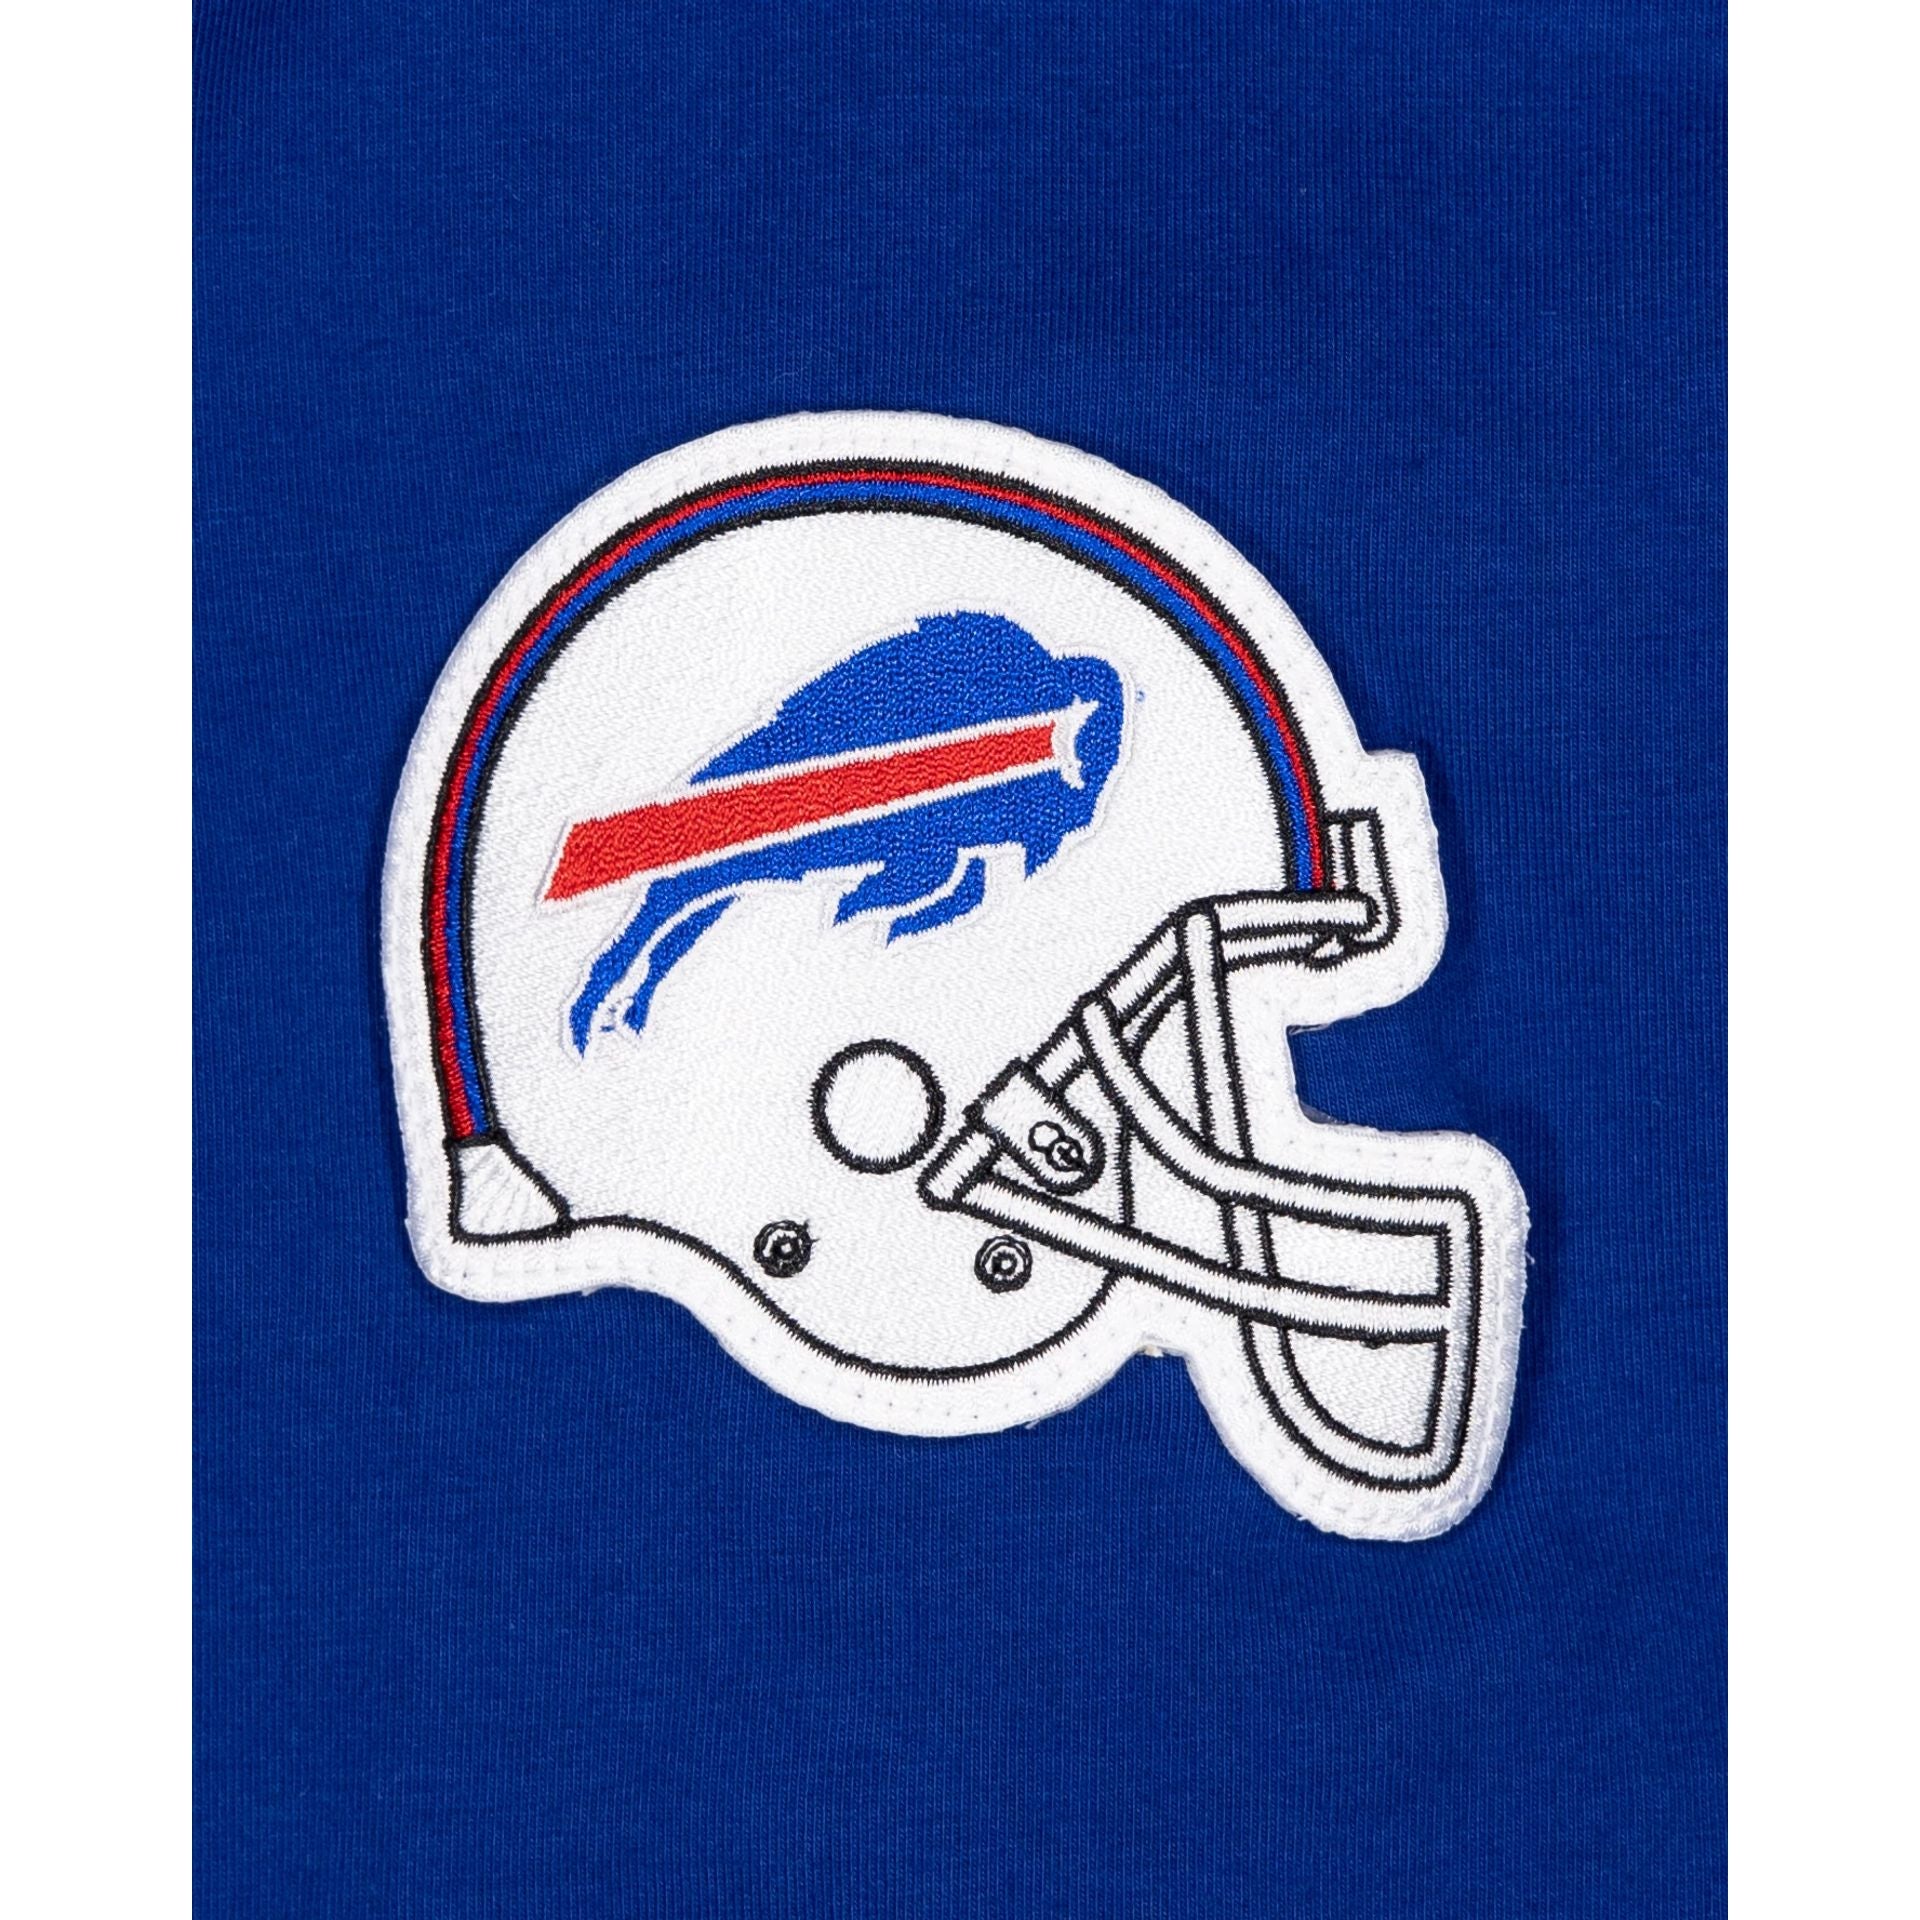 New New Your Buffalo Bills NFL Football Embroidered Patch Team Logo